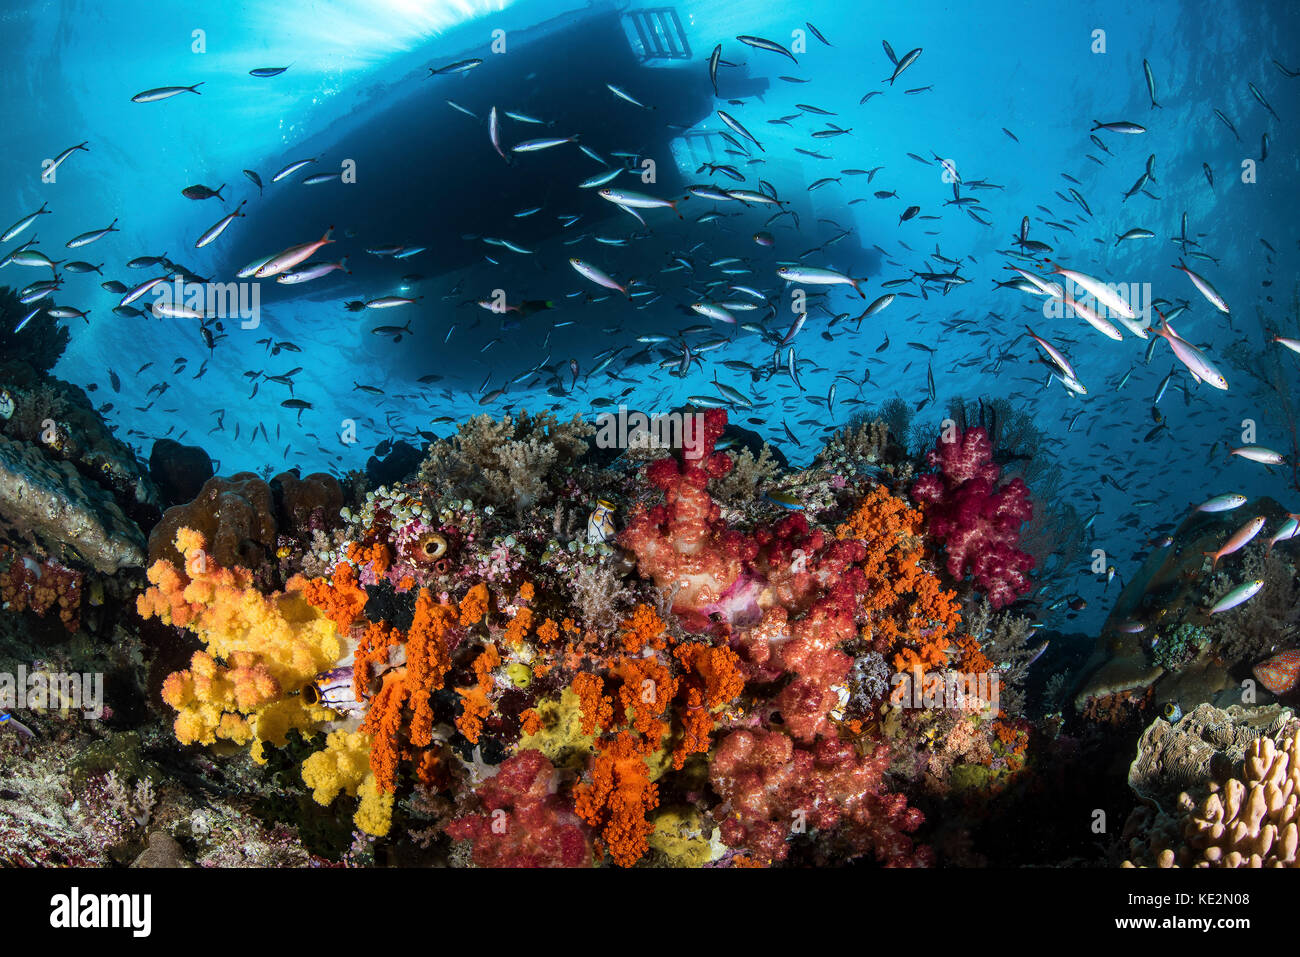 Two boats above a coral reef teeming with fish, Raja Ampat, Indonesia. Stock Photo